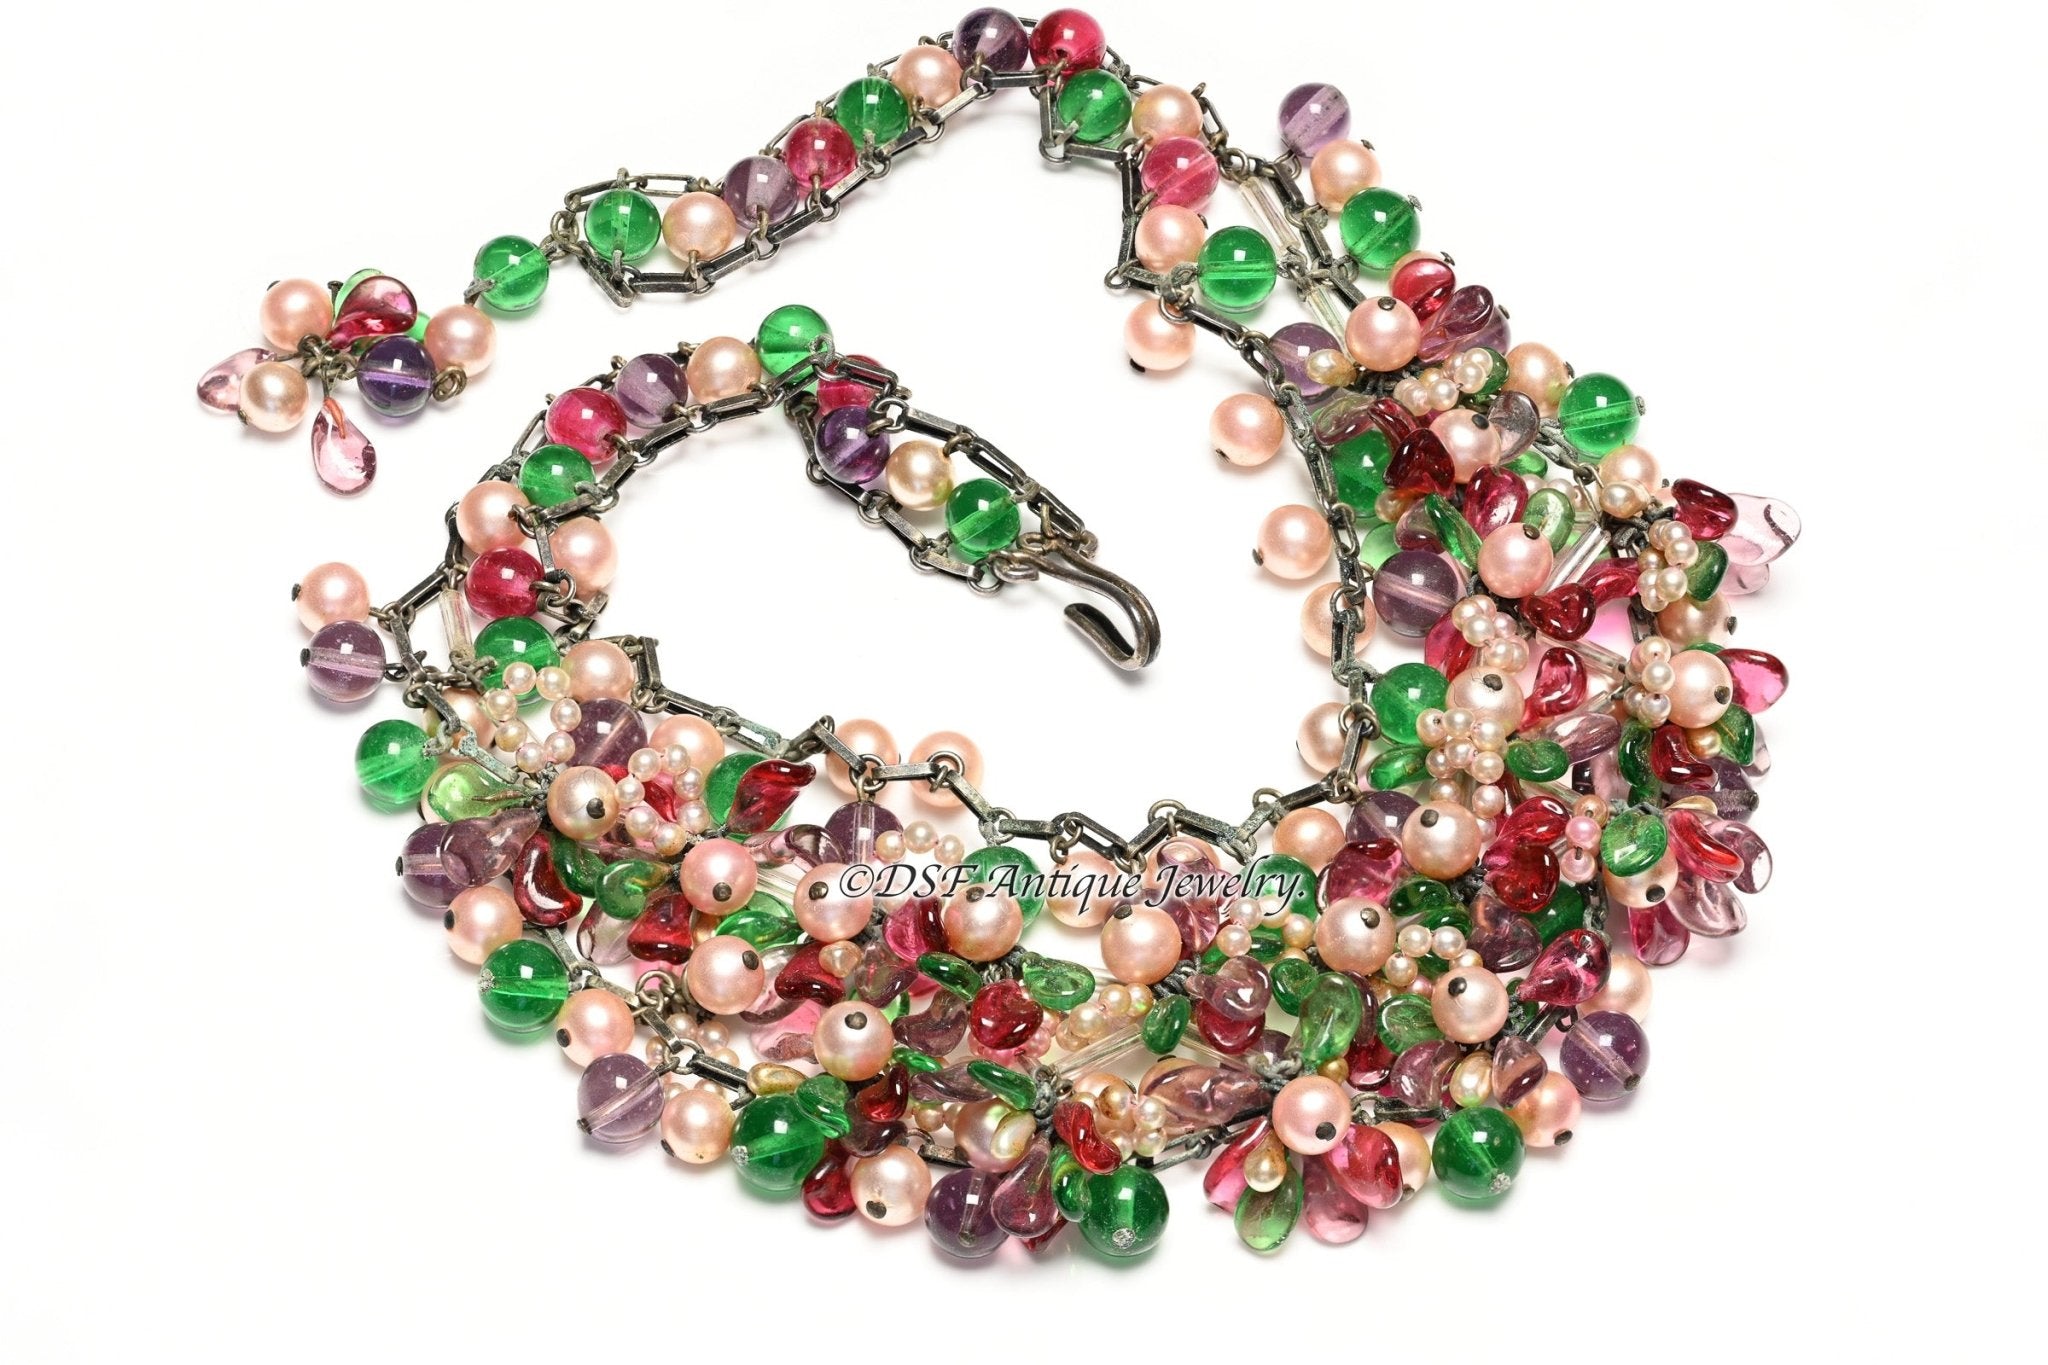 Chanel Paris by Louis Rousselet 1930’s Red Green Purple Glass Pearl Beads Necklace